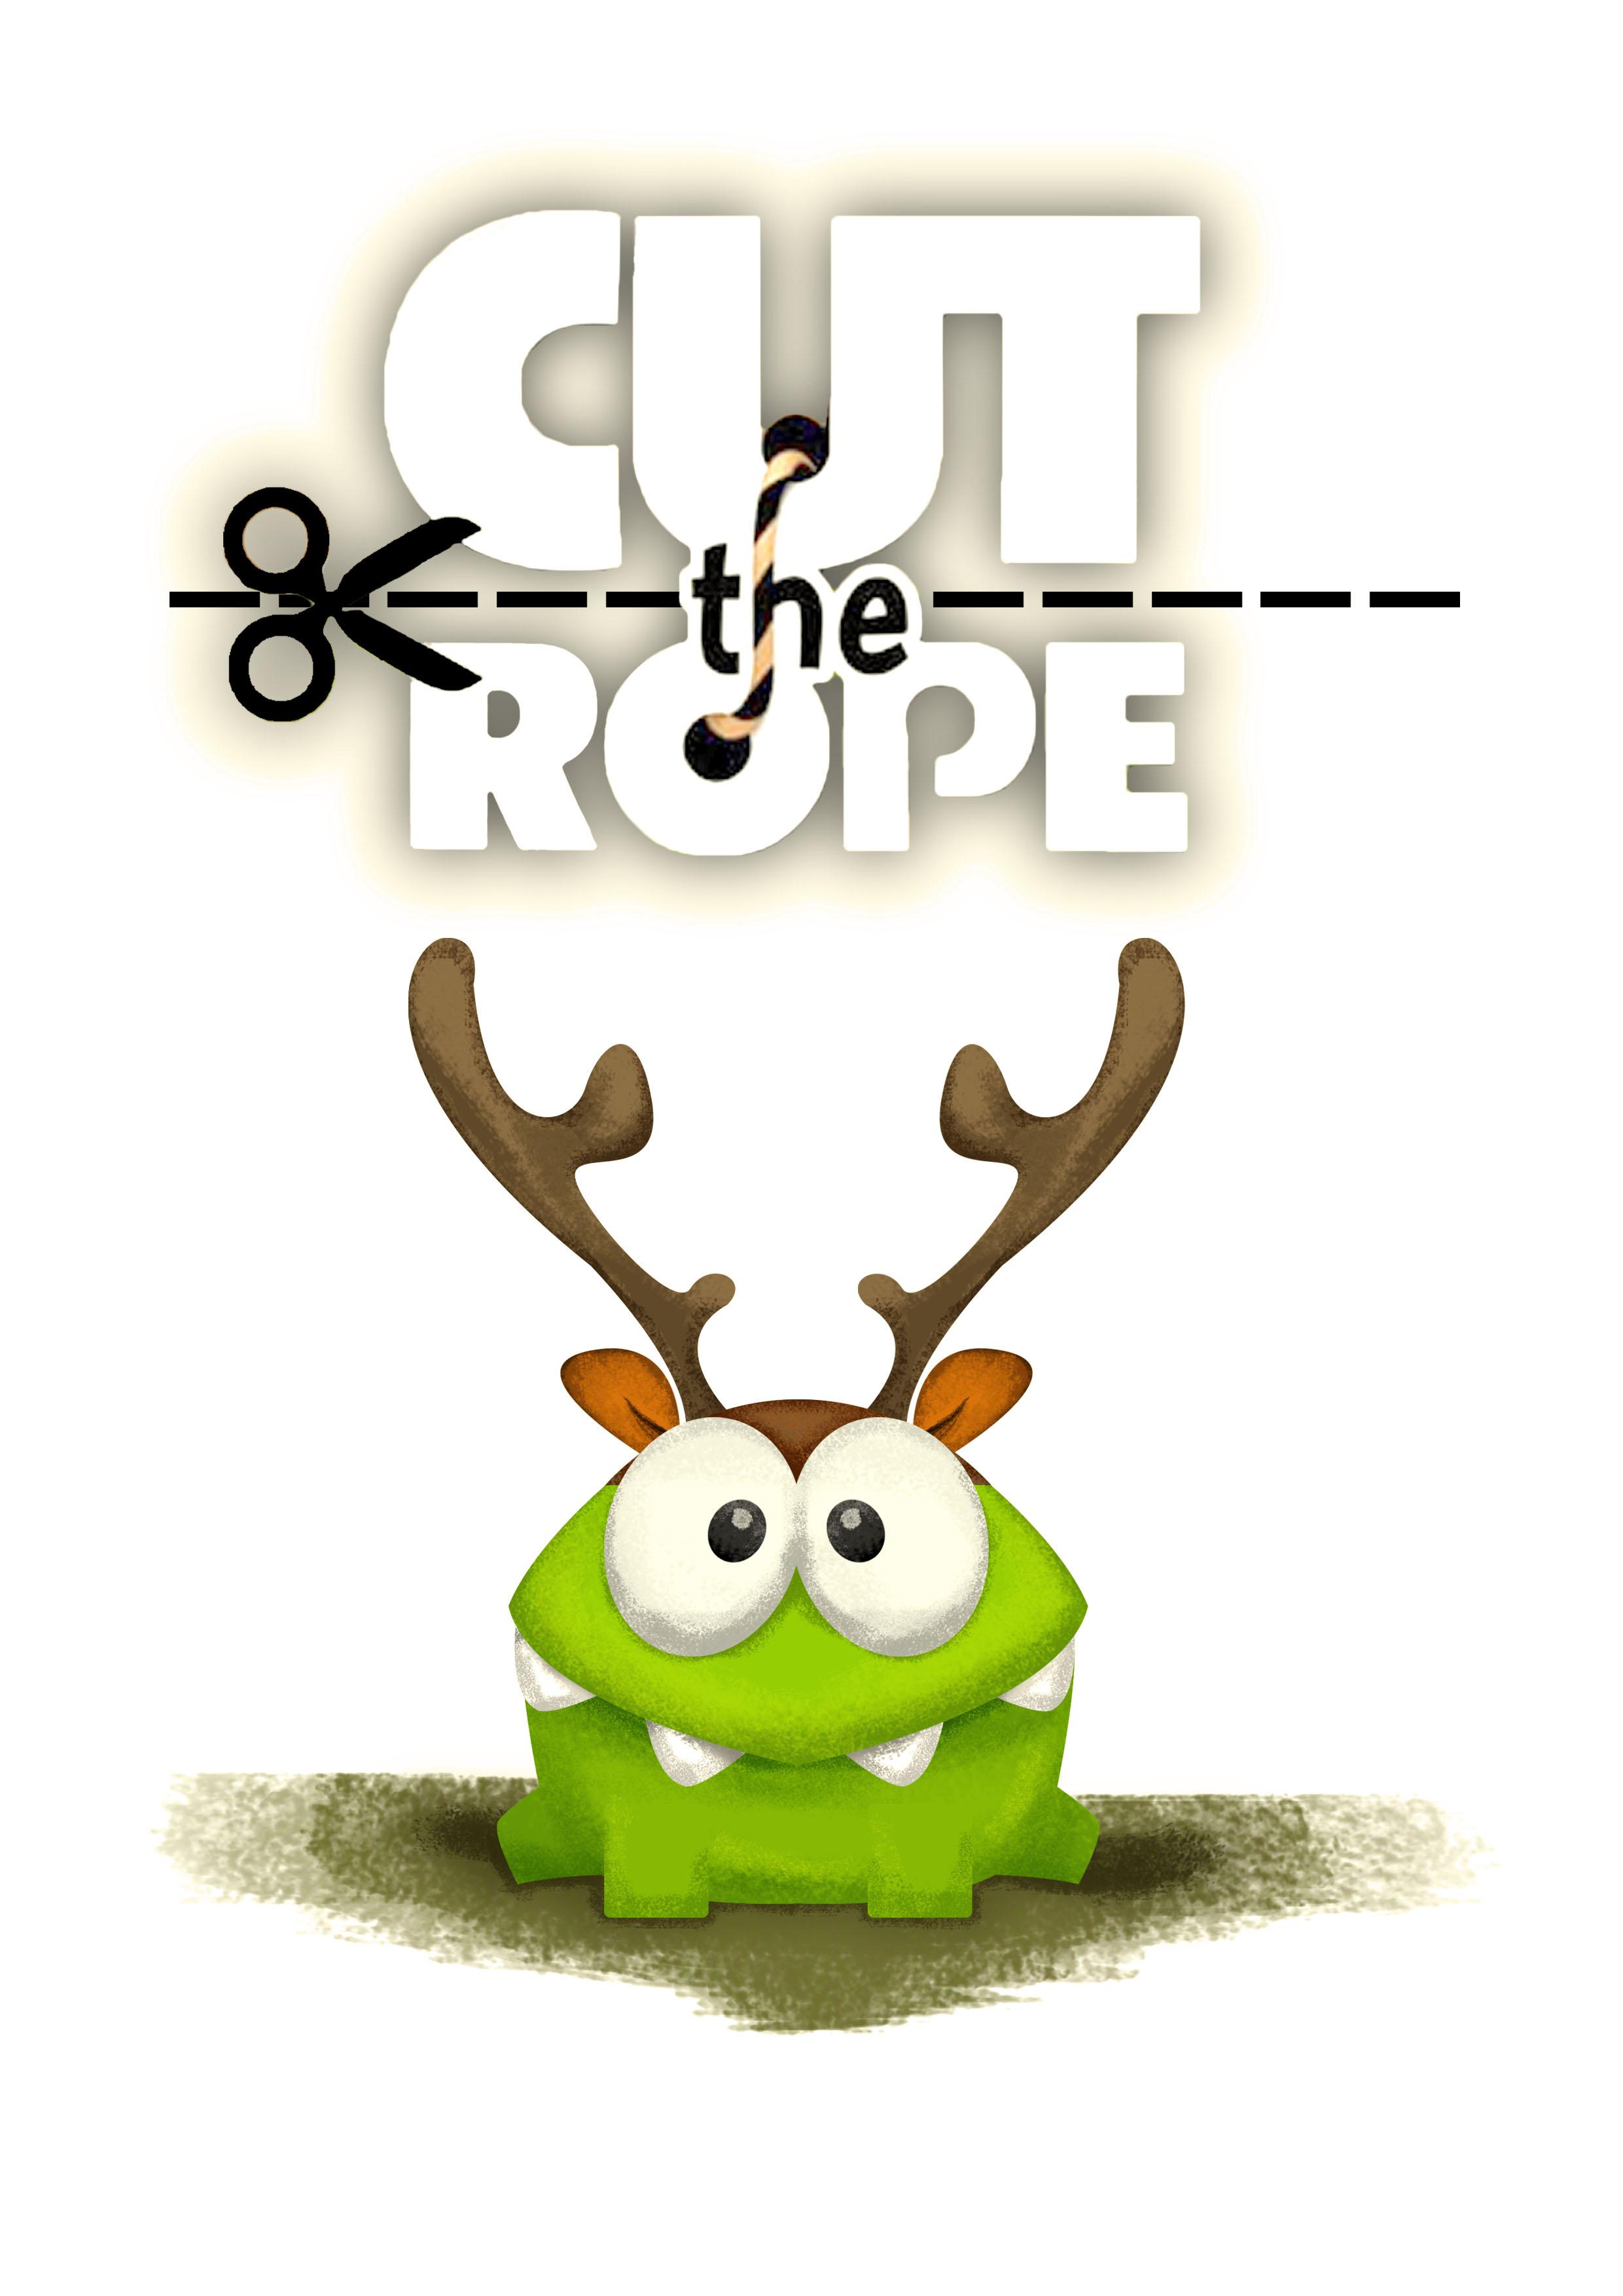 「Cut the Rope: Experiments (カット・ザ・ロープ：実験)」 - iPhoneアプリ | APPLION